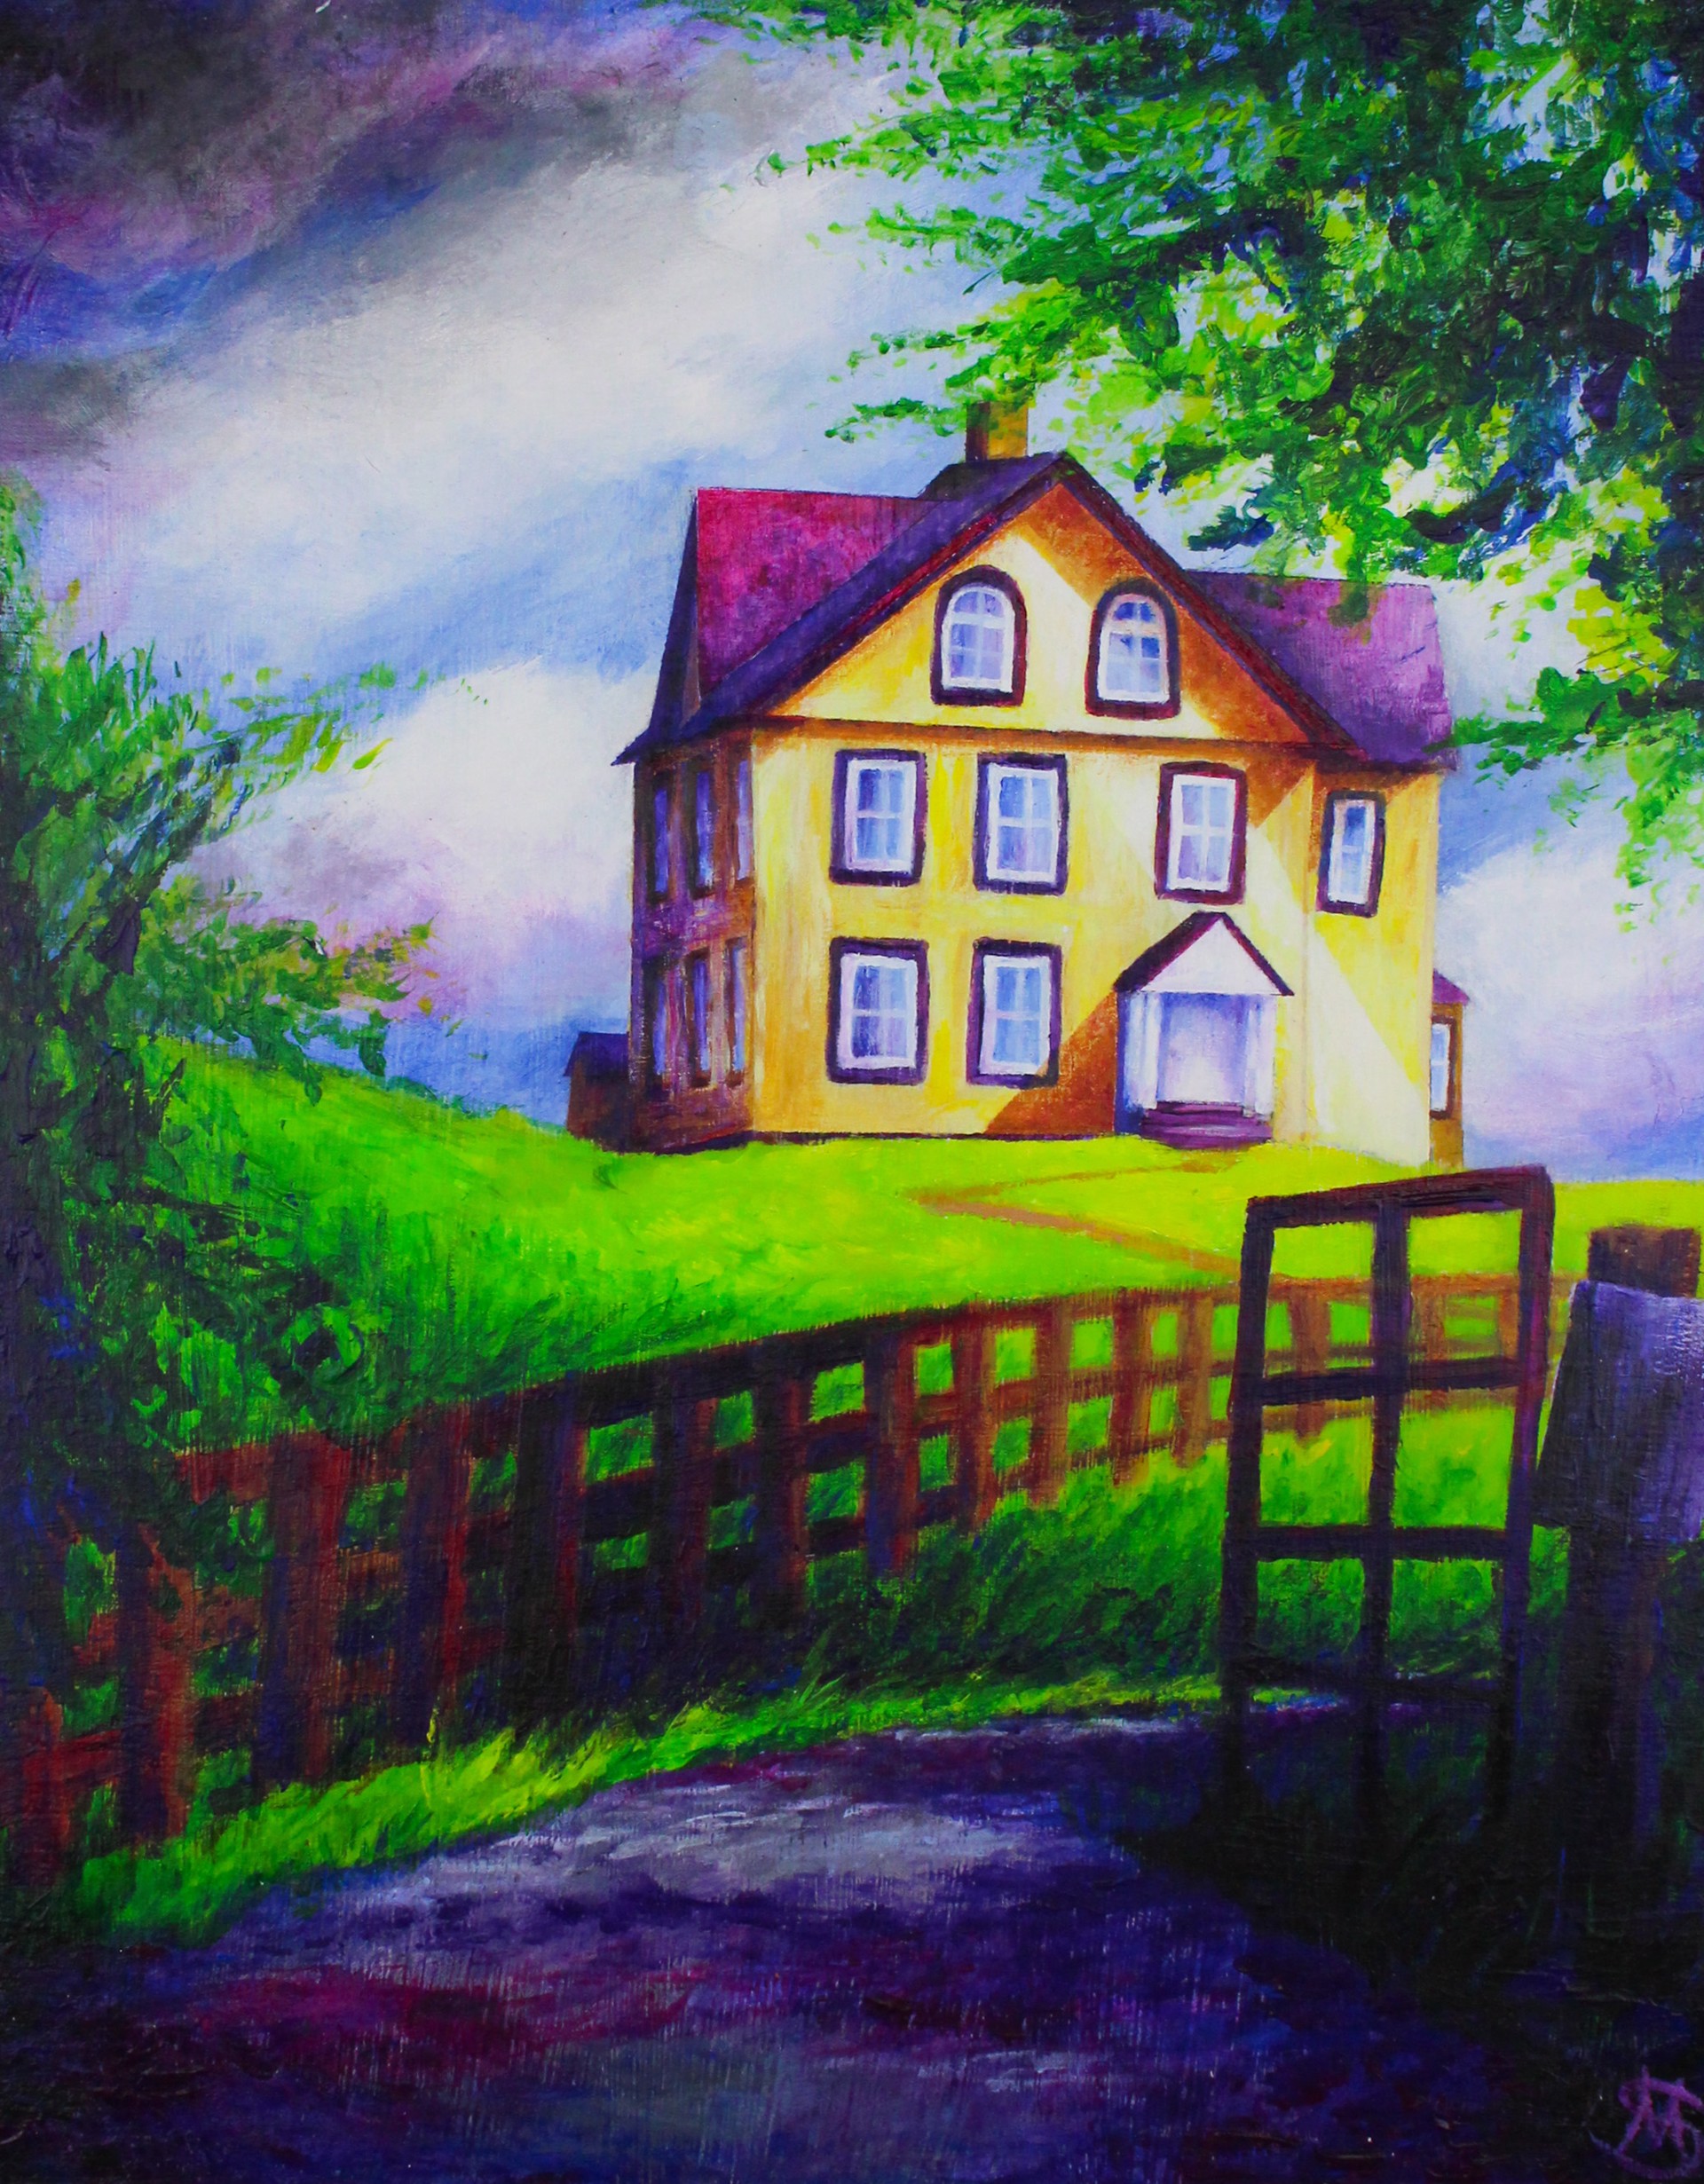 The House on Sunflower Hill by Marrimarra